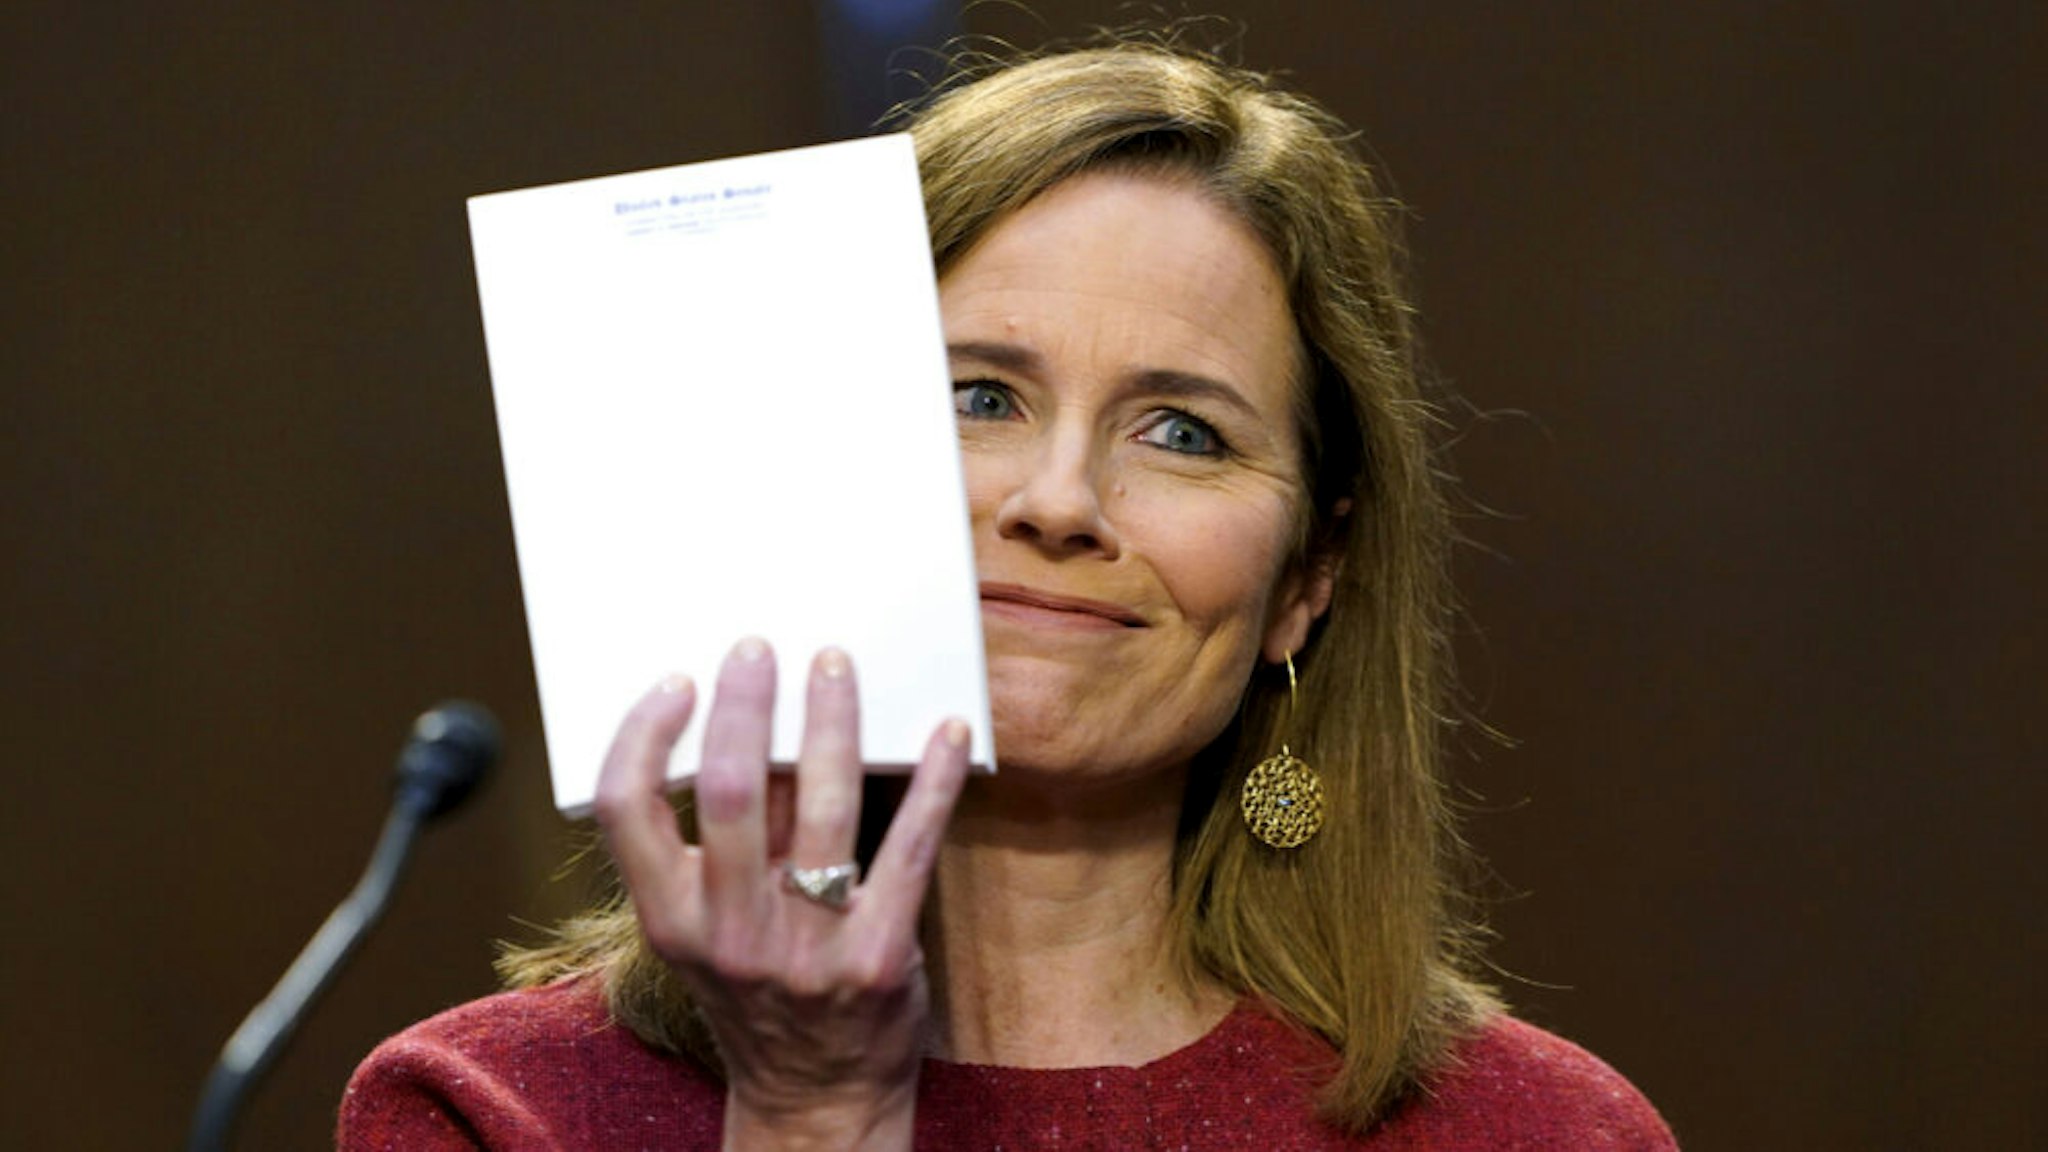 WASHINGTON, DC - OCTOBER 13: Supreme Court nominee Judge Amy Coney Barrett holds up a note pad on the second day of her Supreme Court confirmation hearing before the Senate Judiciary Committee on Capitol Hill on October 13, 2020 in Washington, DC. With less than a month until the presidential election, President Donald Trump tapped Amy Coney Barrett to be his third Supreme Court nominee in just four years. If confirmed, Barrett would replace the late Associate Justice Ruth Bader Ginsburg.